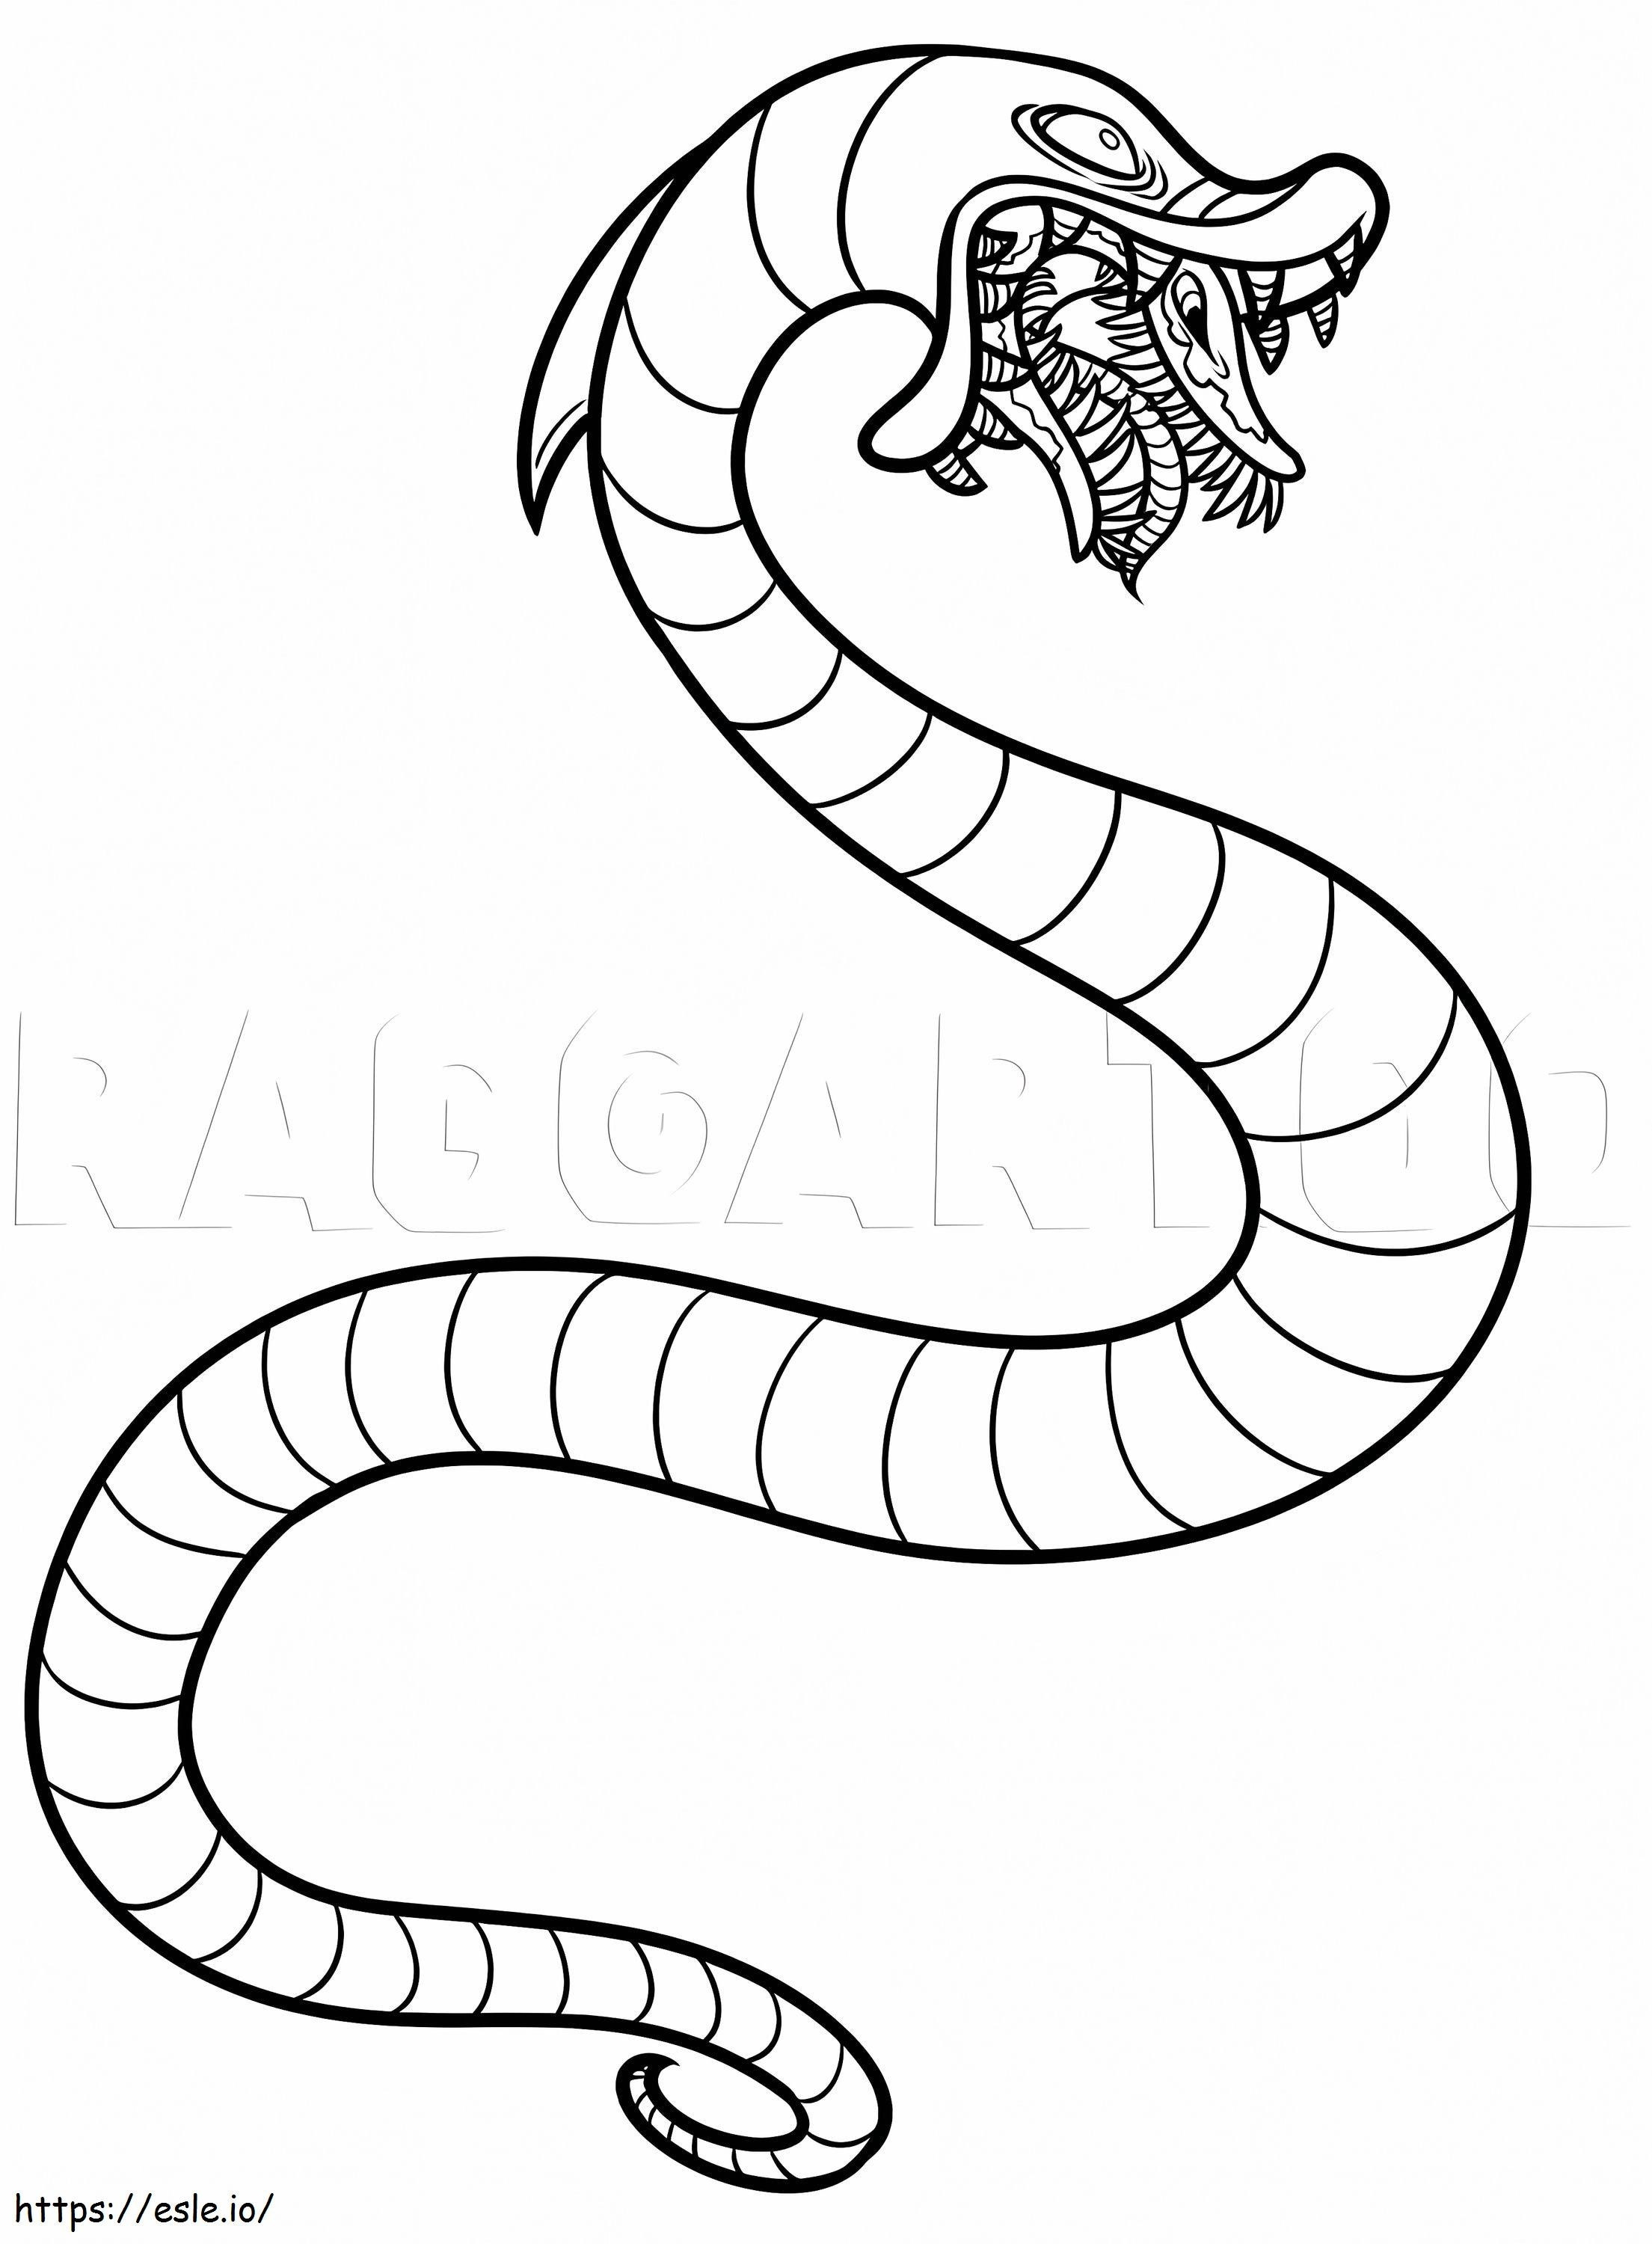 Sandworm From Beetlejuice coloring page